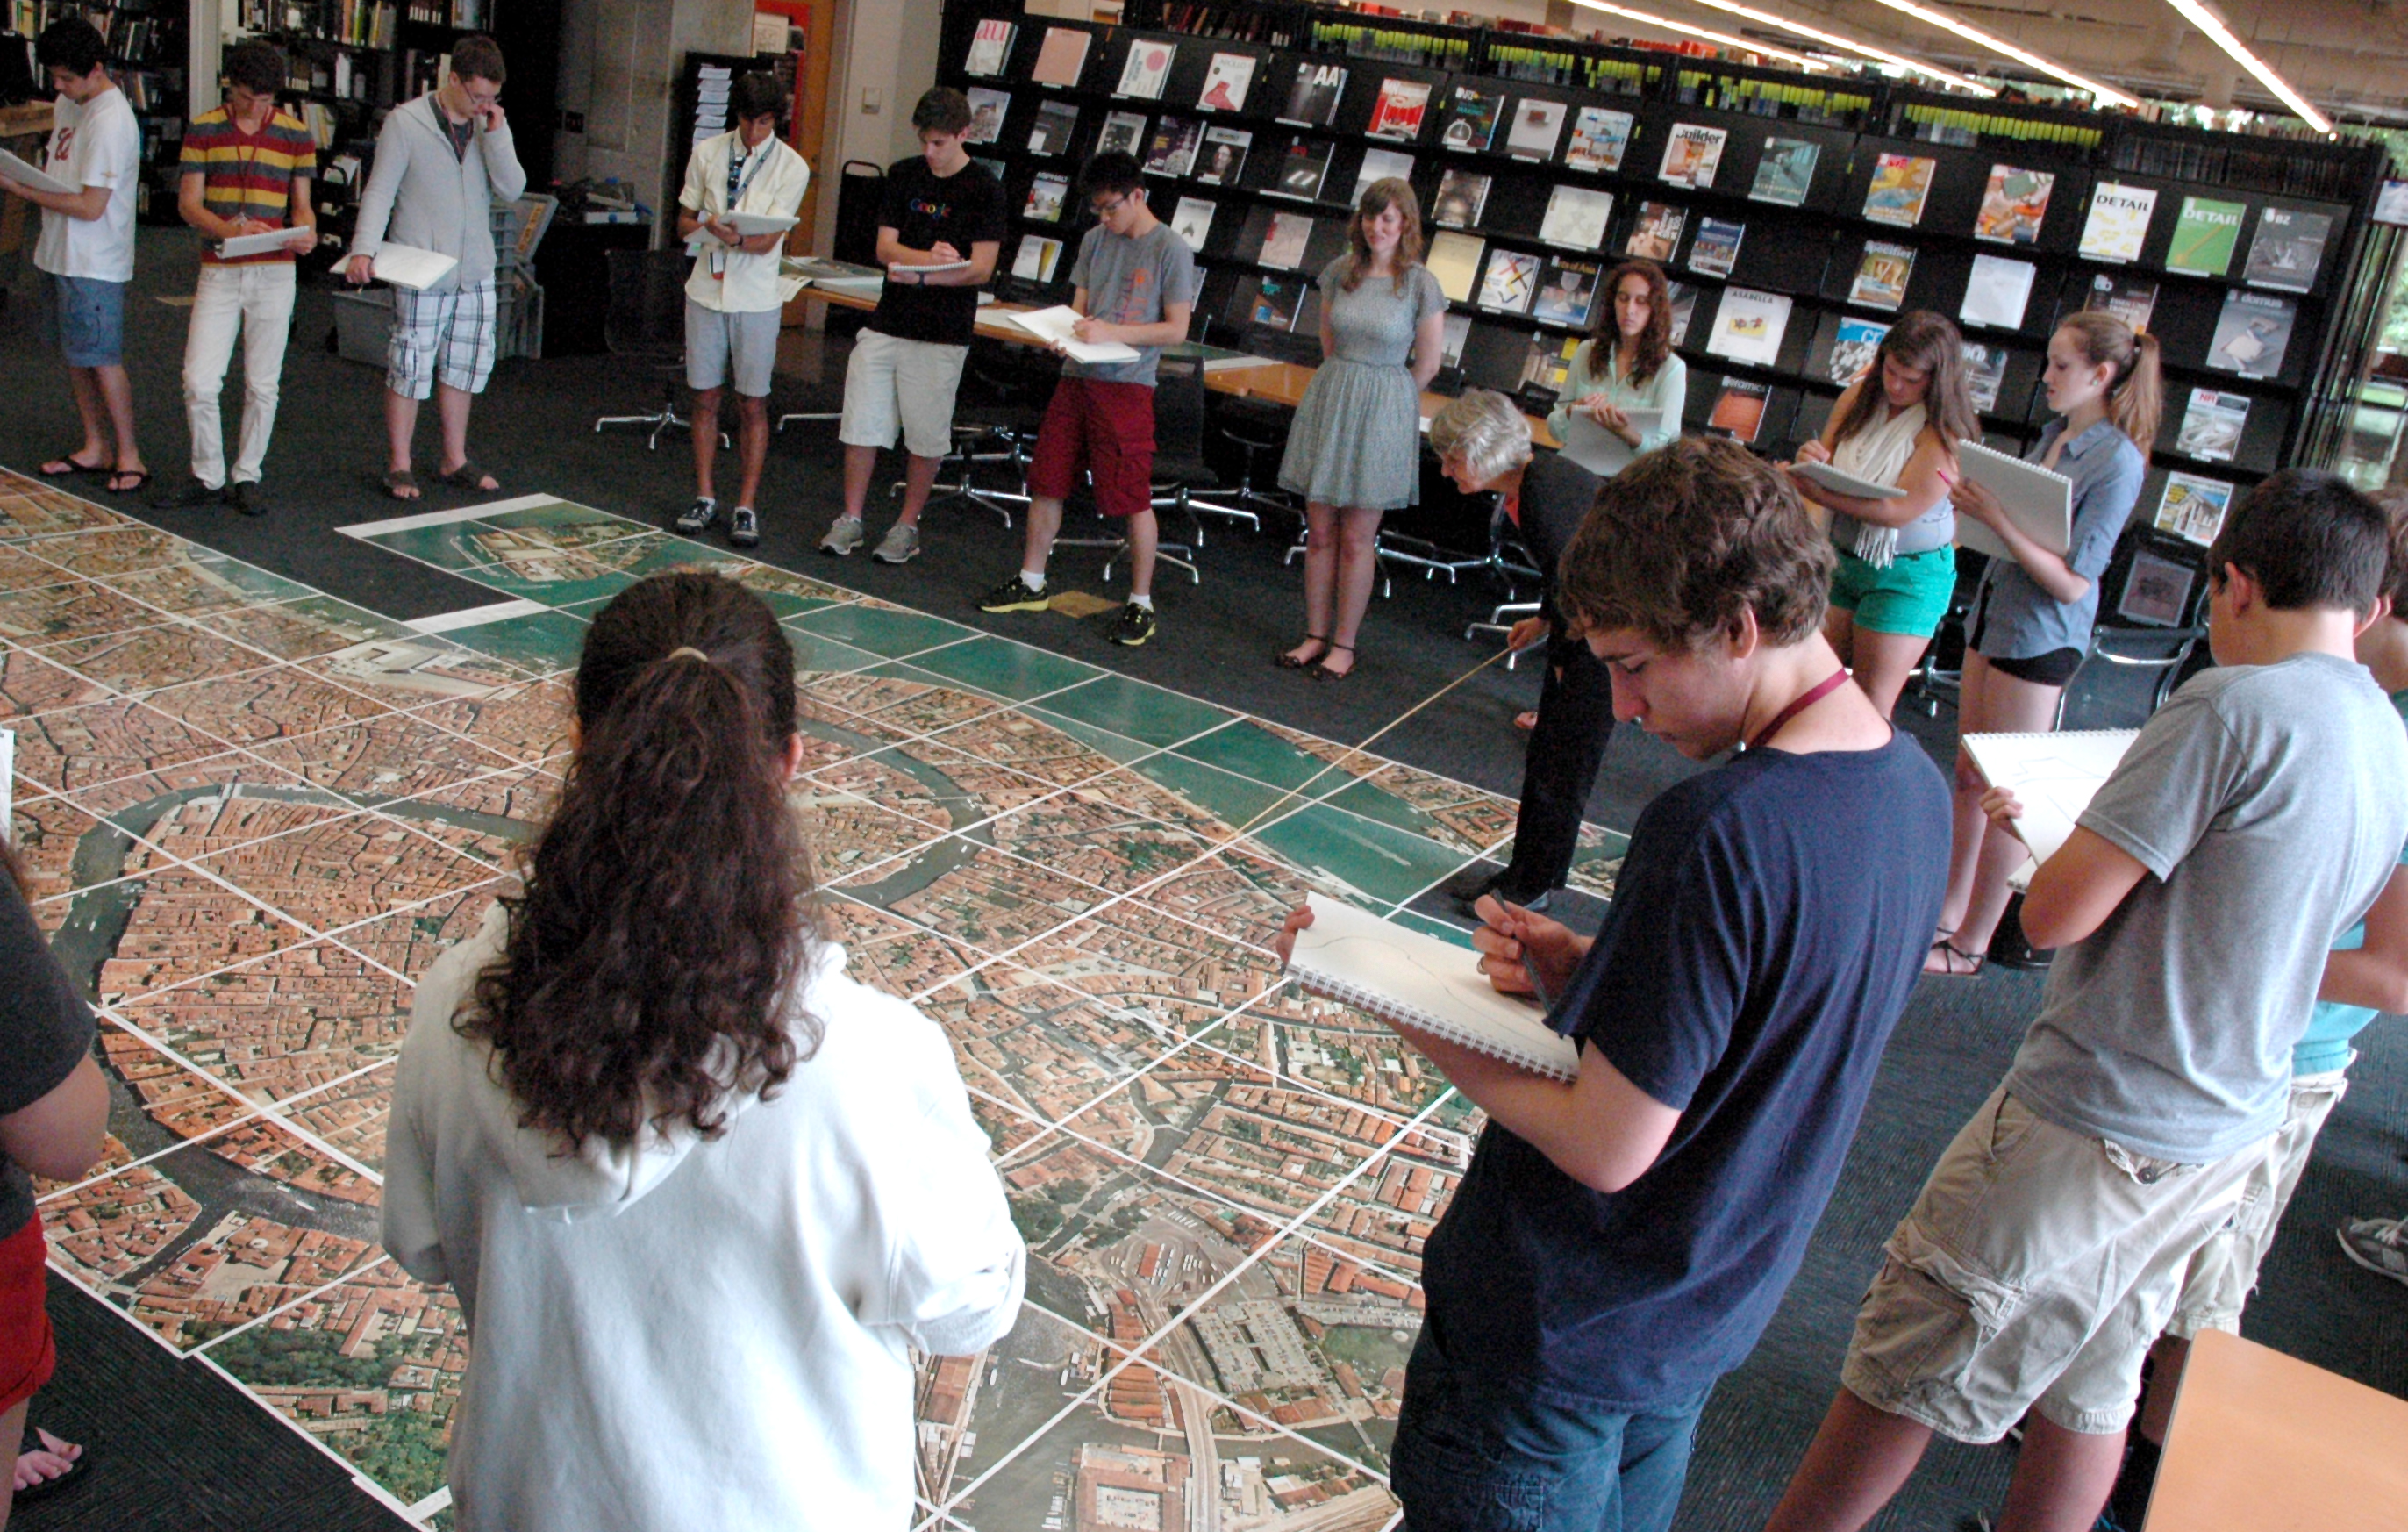 Students with sketchbooks gather around a large map on the floor.